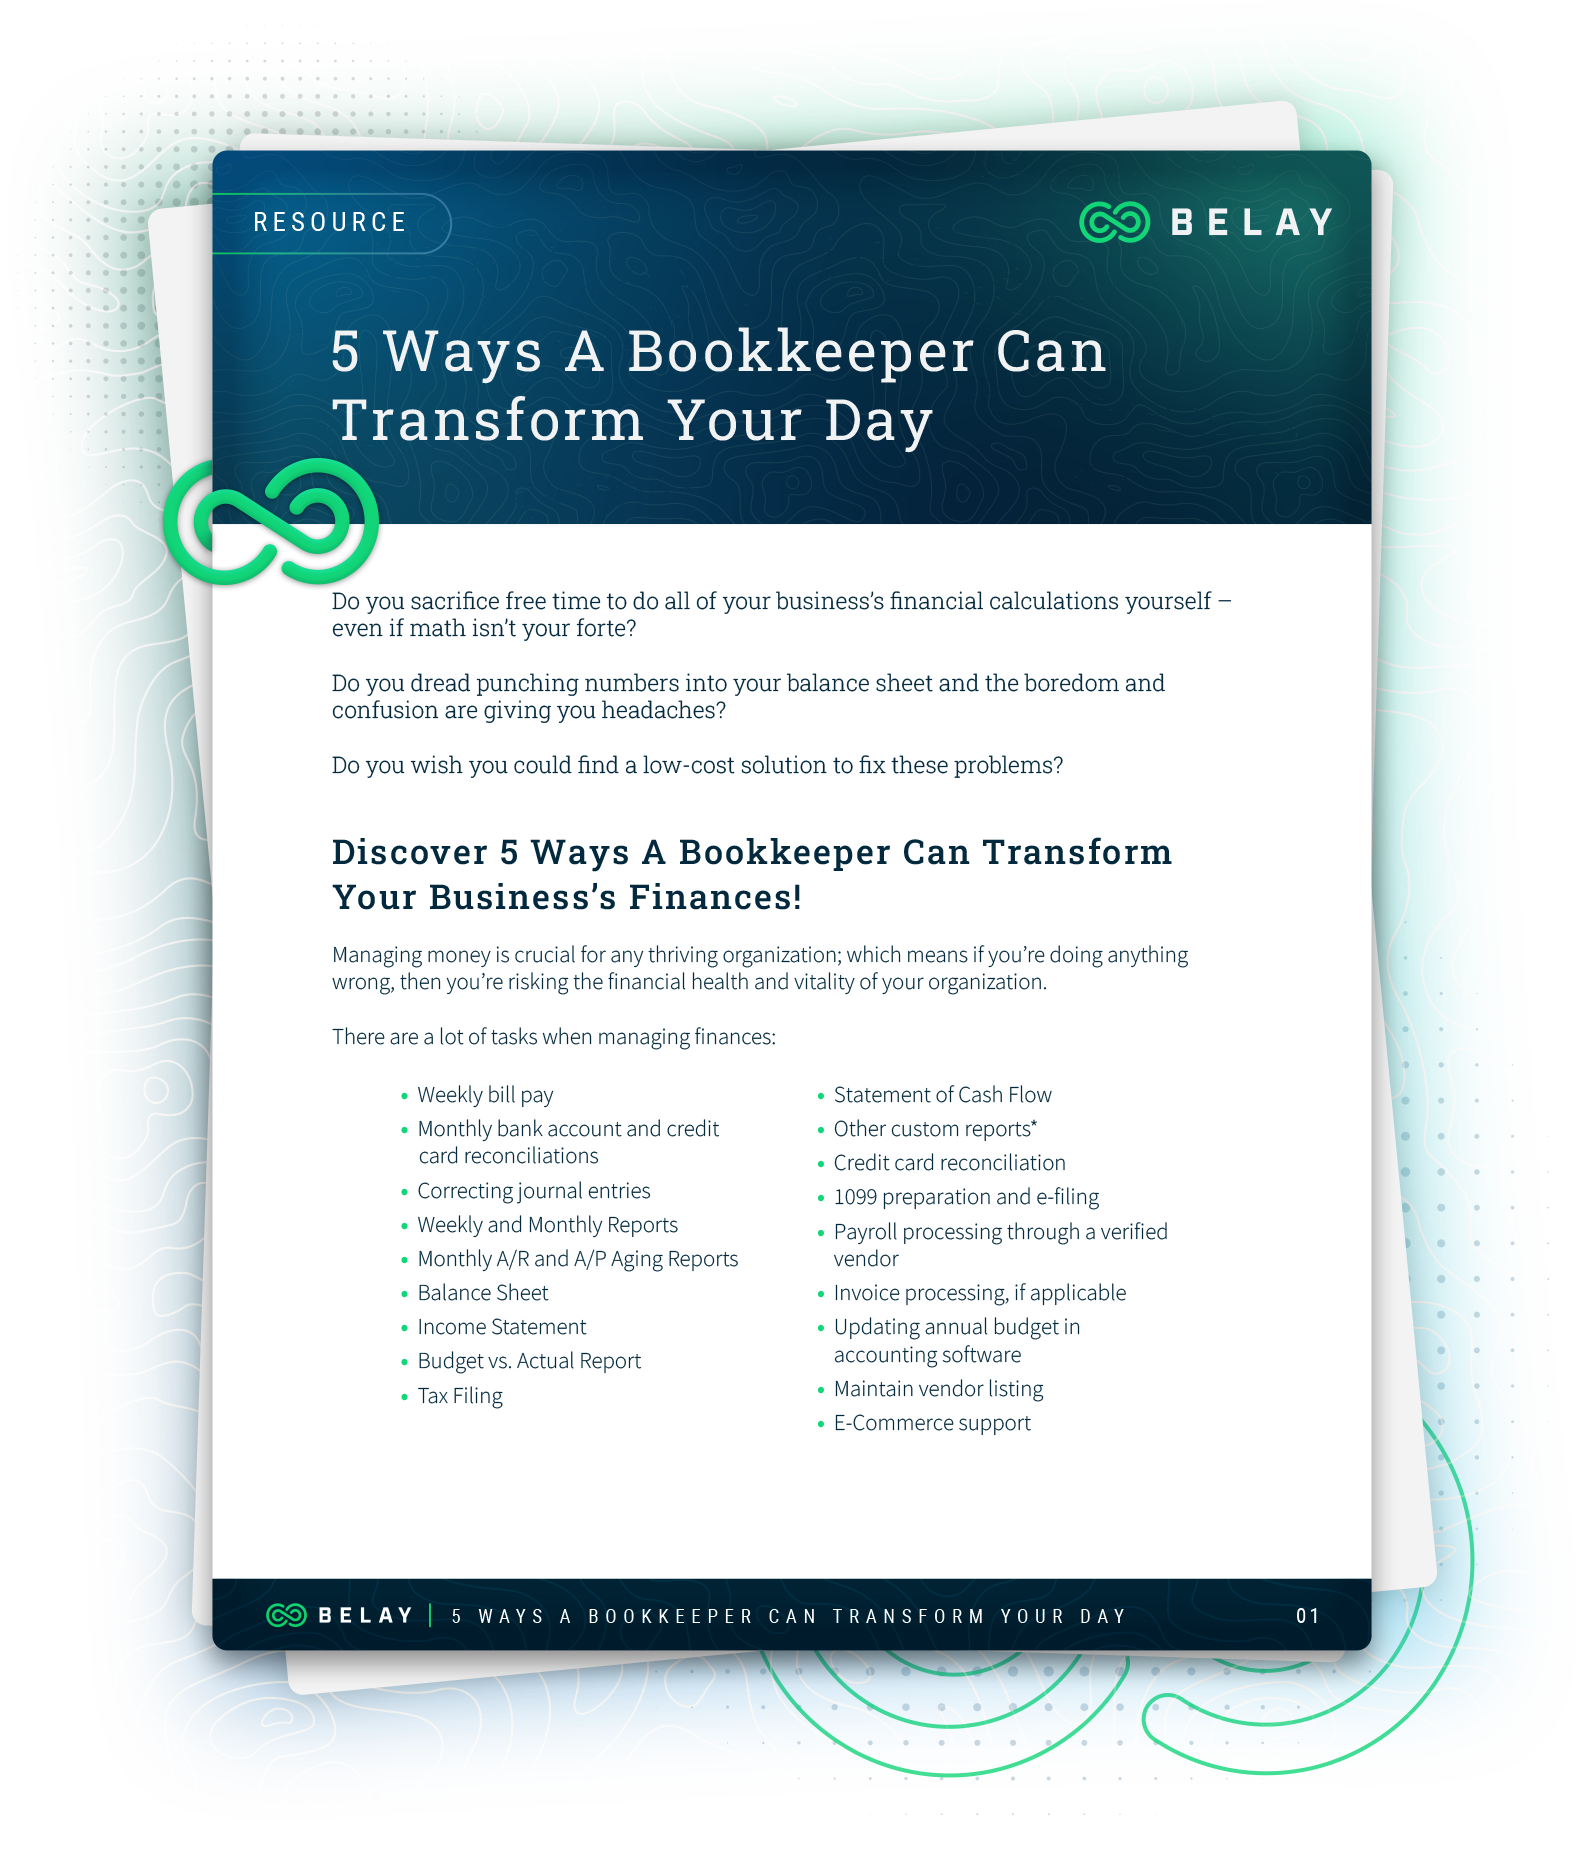 5 Ways A Bookkeeper Can Transform Your Day